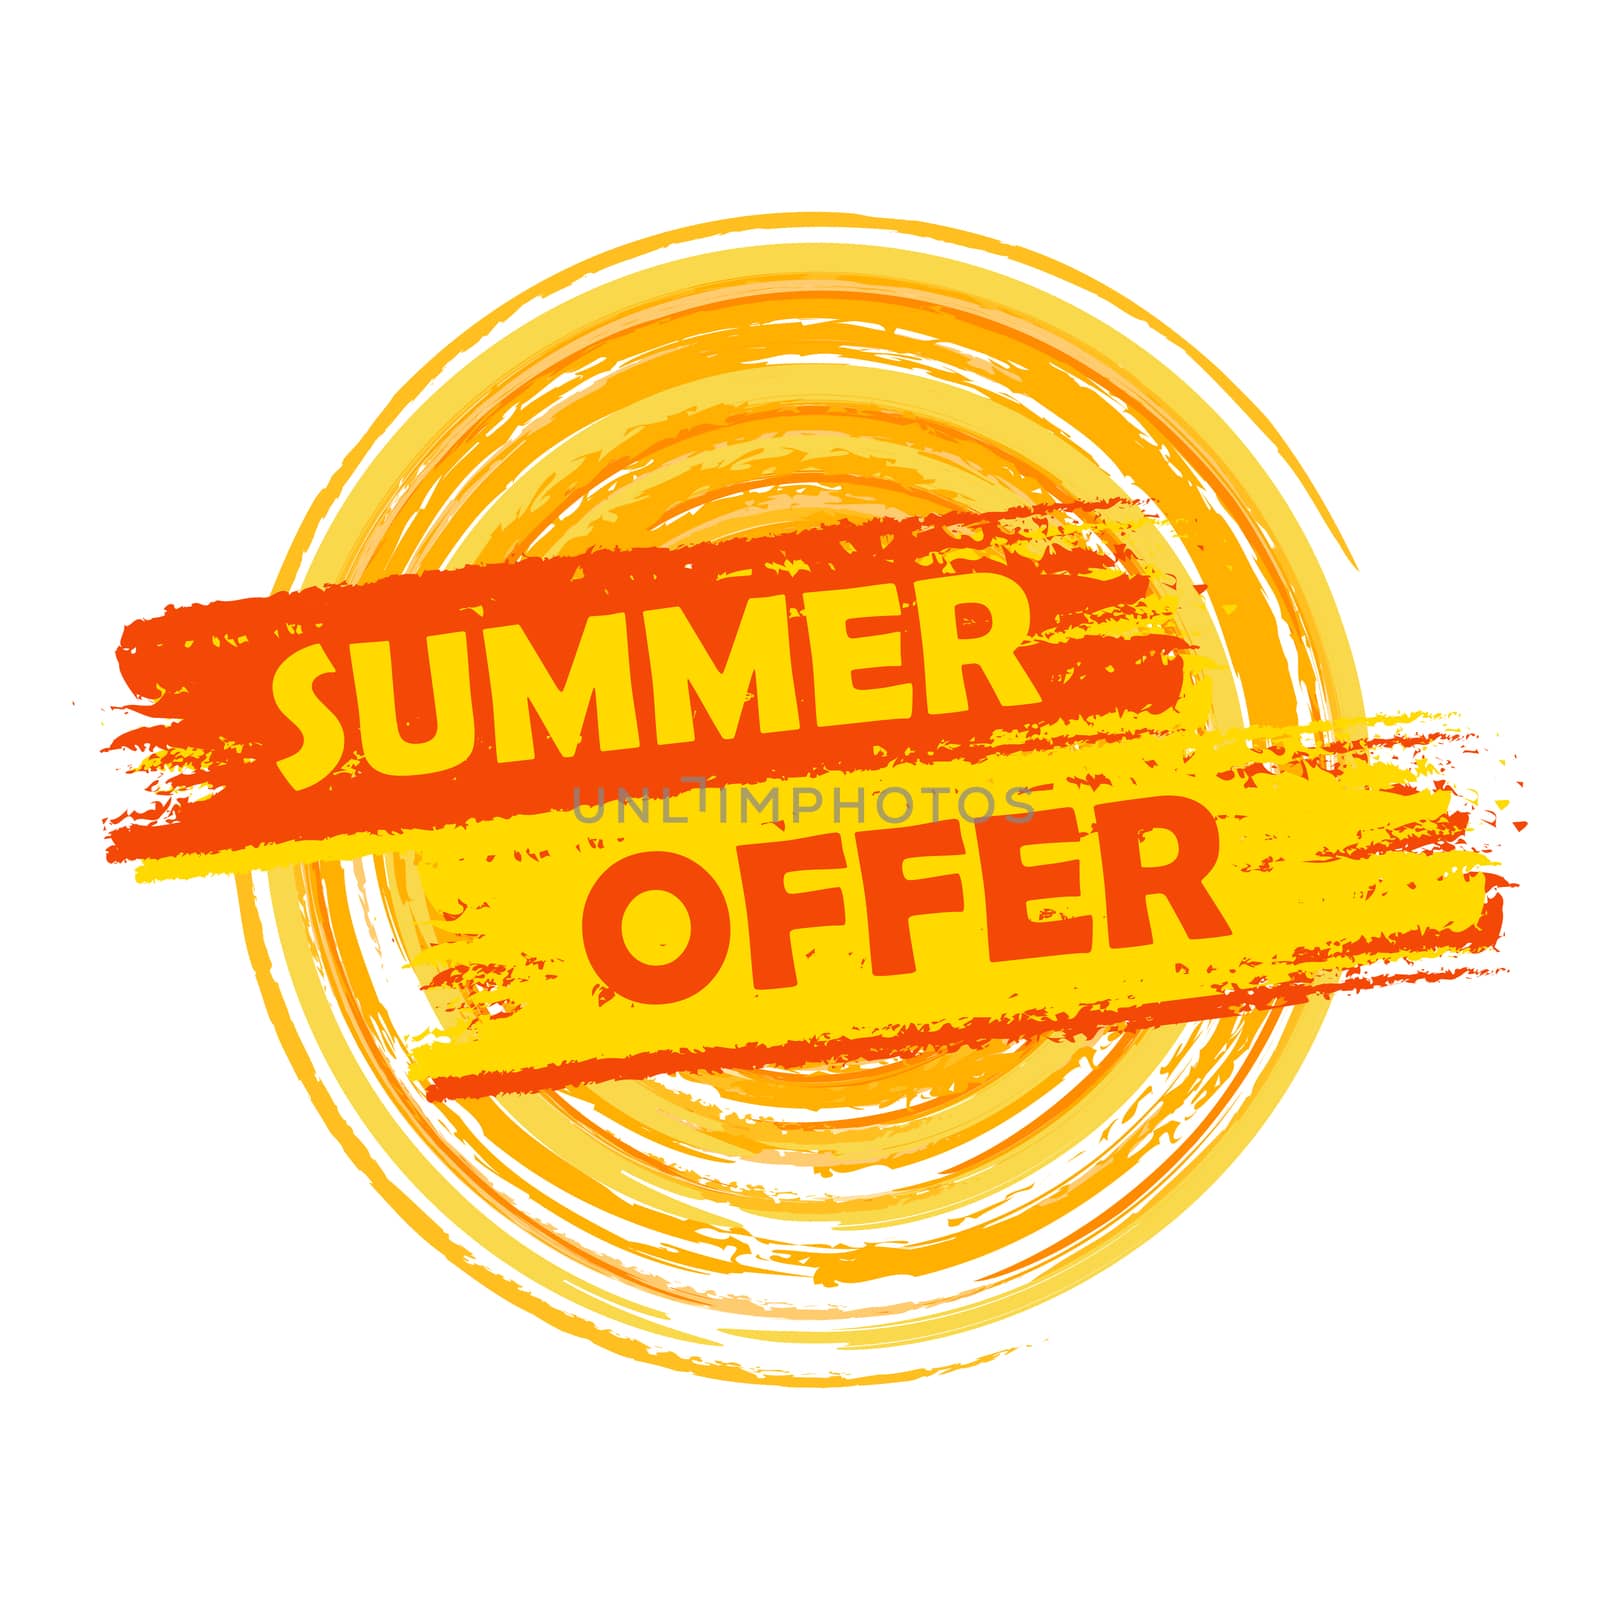 summer offer with sun sign, yellow and orange drawn label by marinini